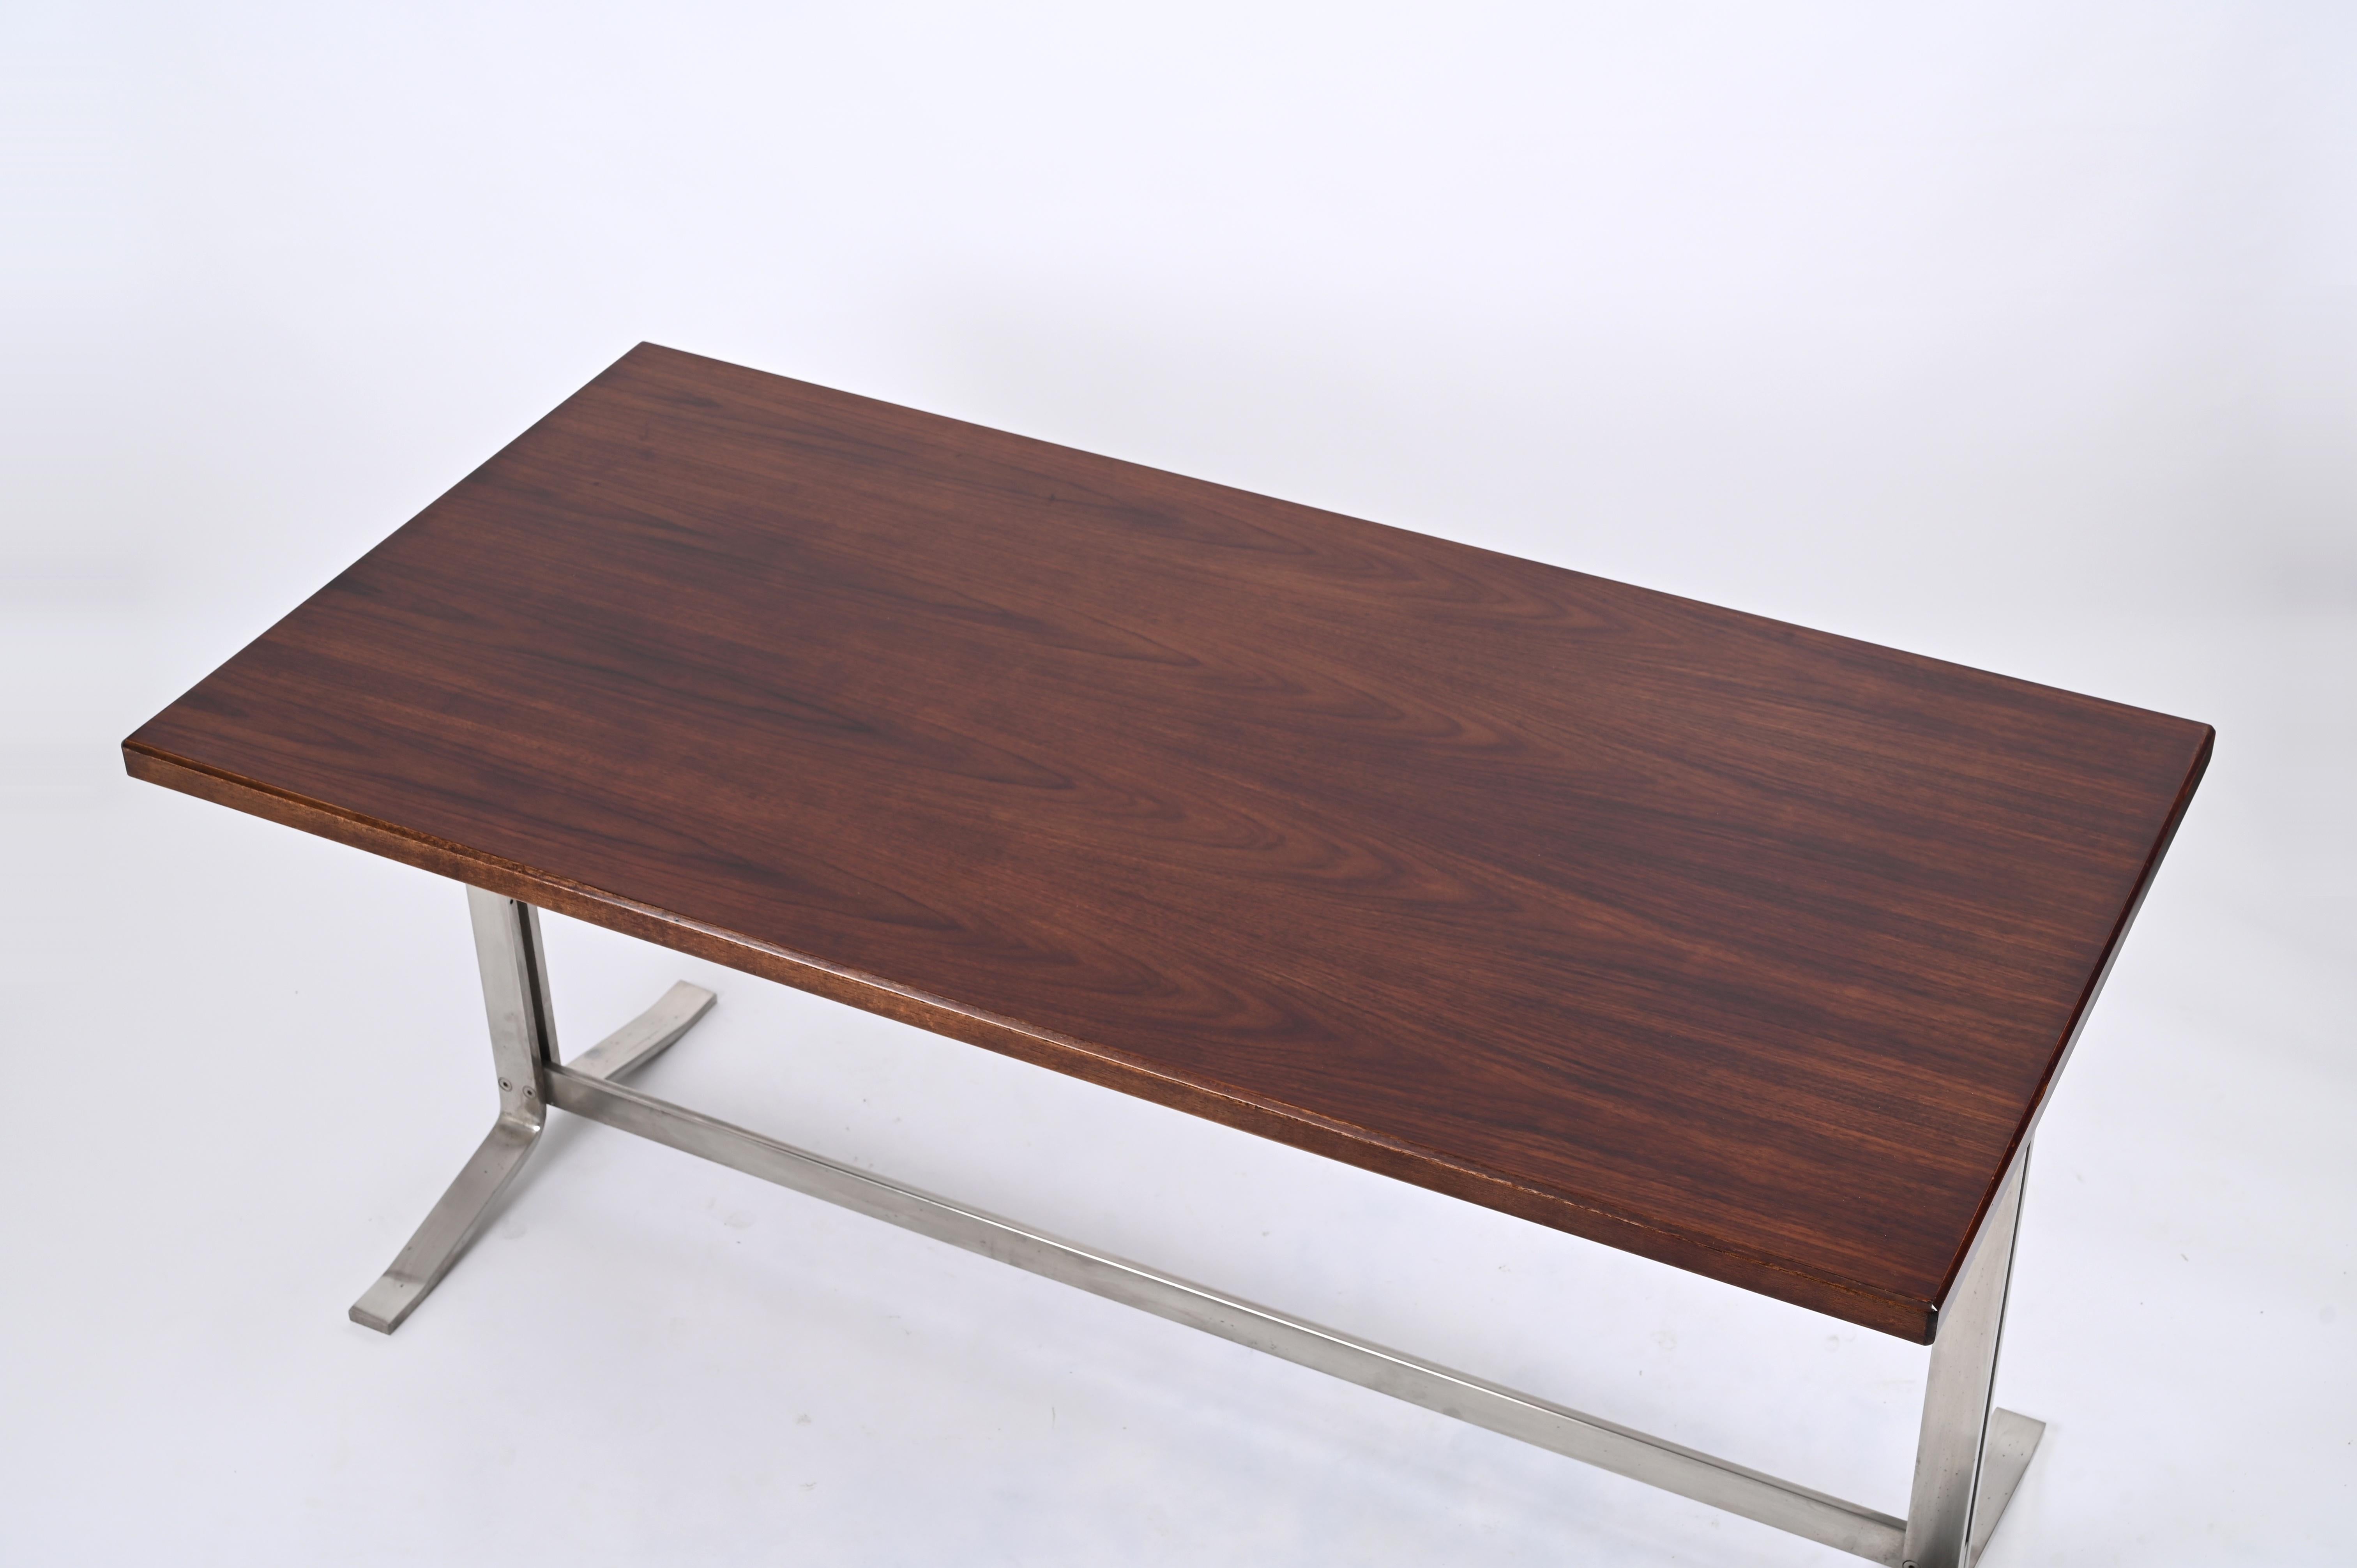 Midcentury Desk in Walnut and Steel by Moscatelli for Formanova, Italy, 1965 For Sale 4